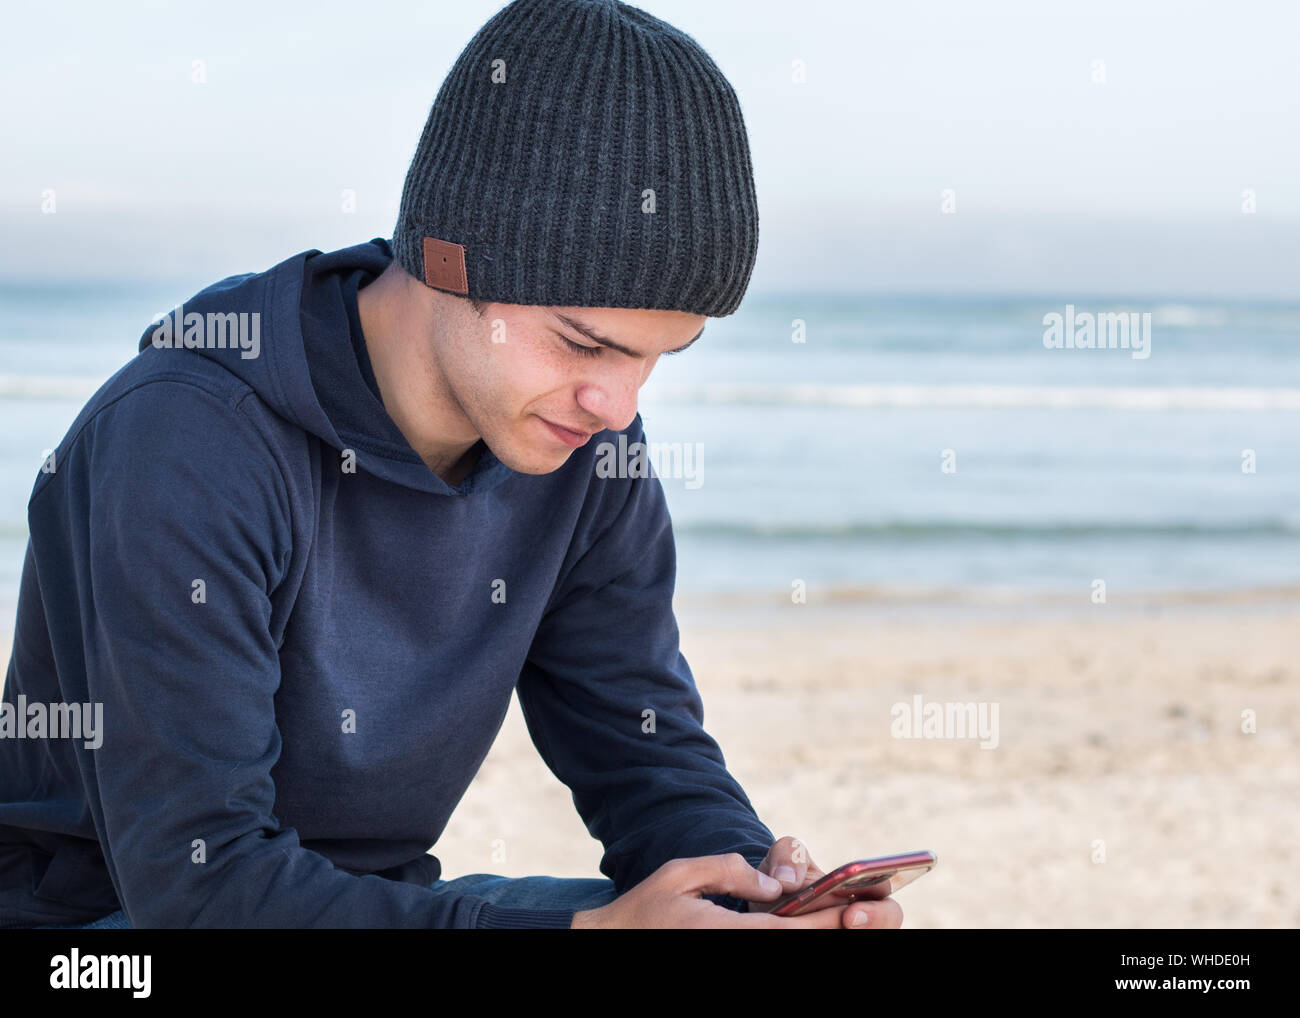 Male model wearing dark grey knitted beanie with Bluetooth speakers inside, listening to music with mobile smart phone outdoors. Looking at mobile dev Stock Photo